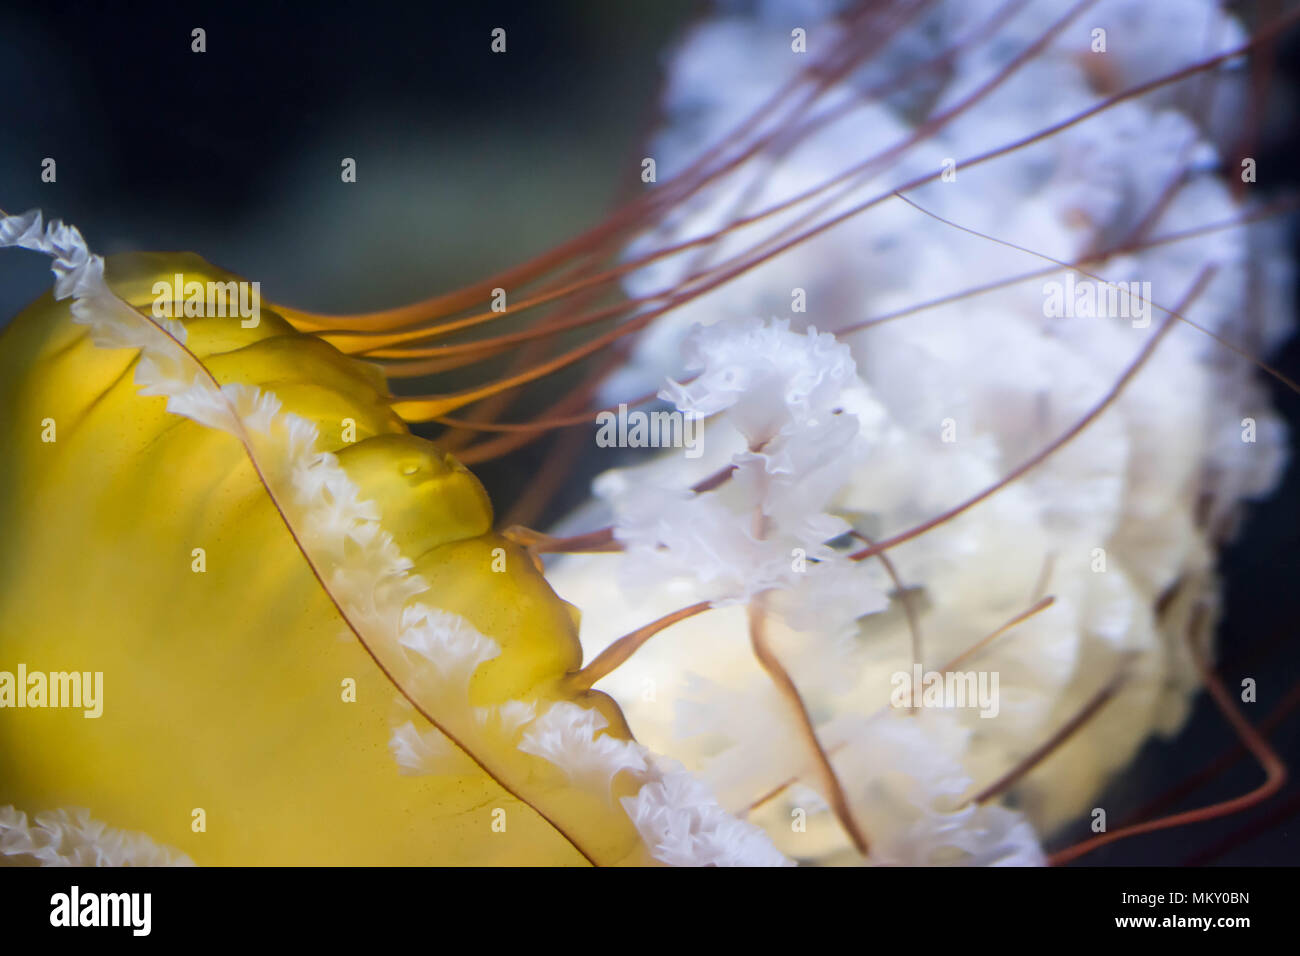 Background image of Chrysaora fuscescens macro close up shot. The Pacific sea nettle (Chrysaora fuscescens), or West Coast sea nettle, is a common fre Stock Photo